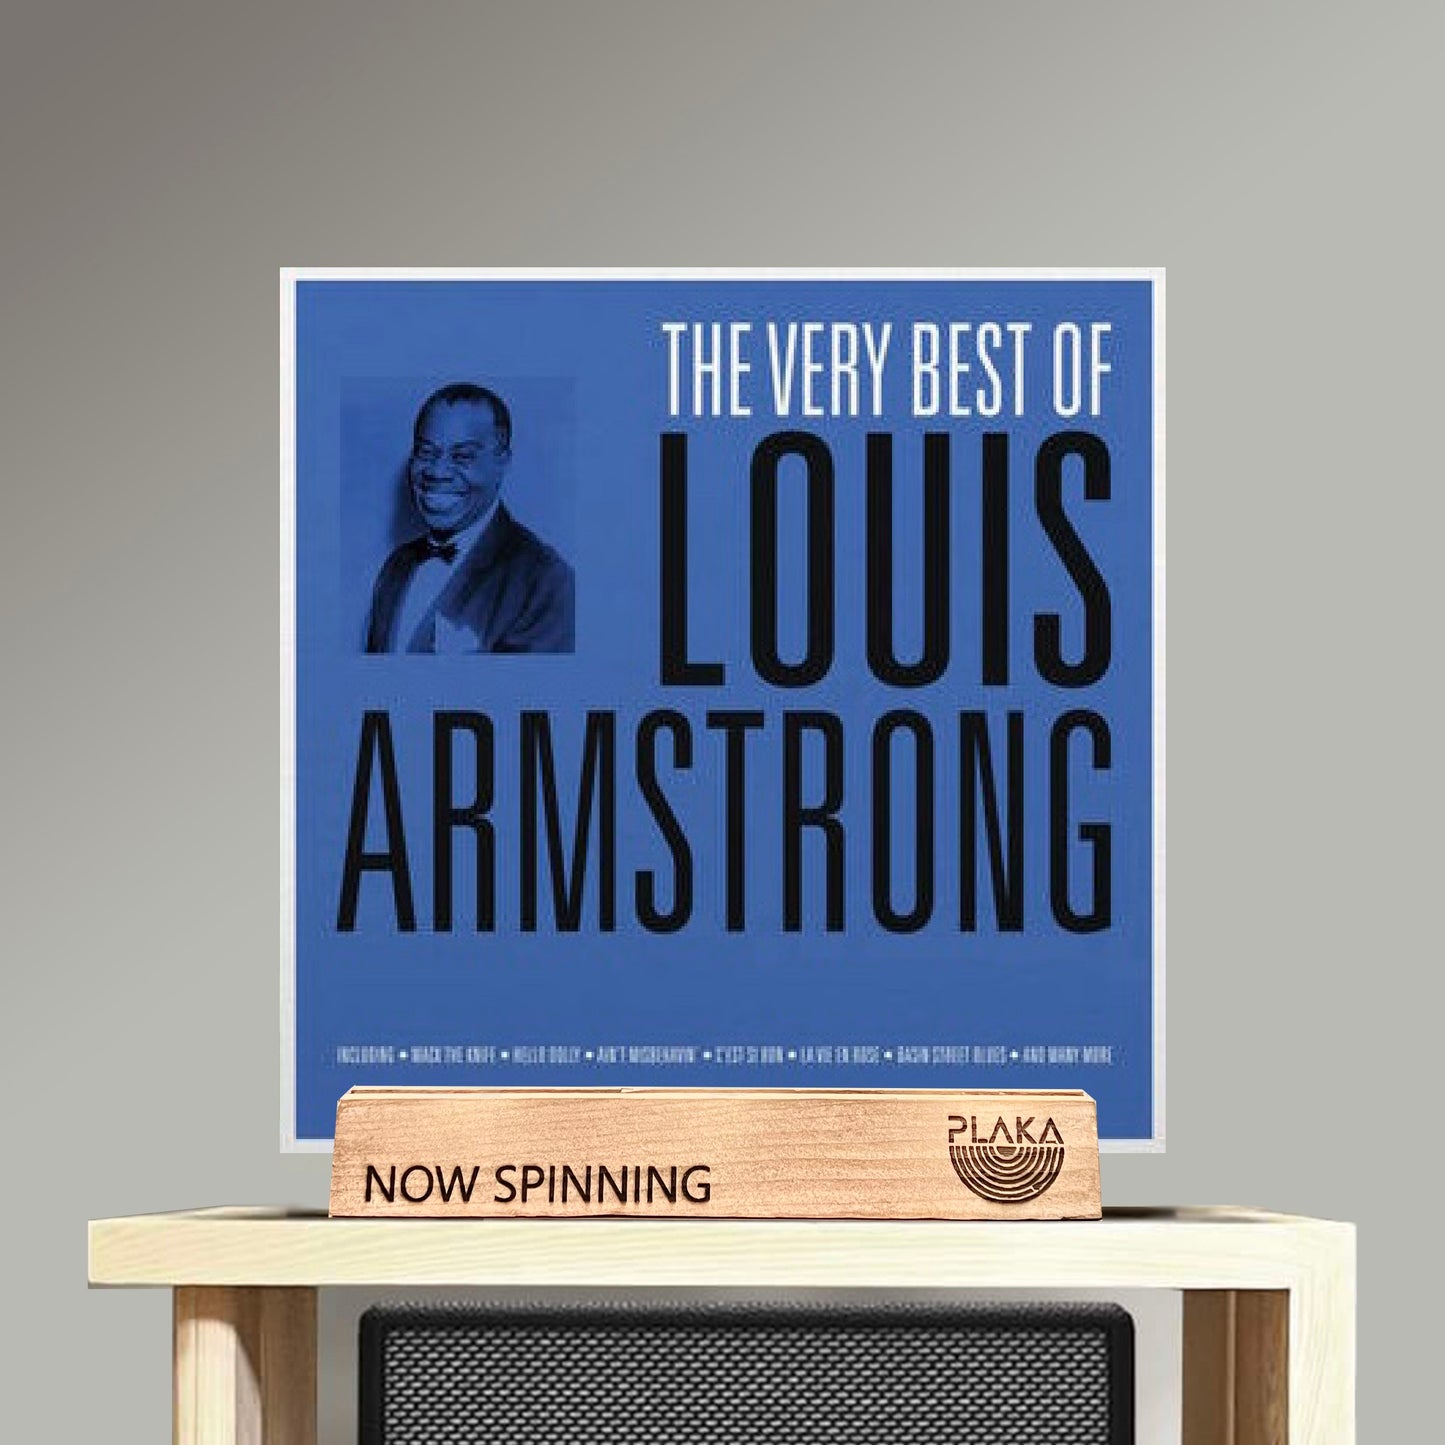 Louis Armstrong - The Very Best of Louis Armstrong